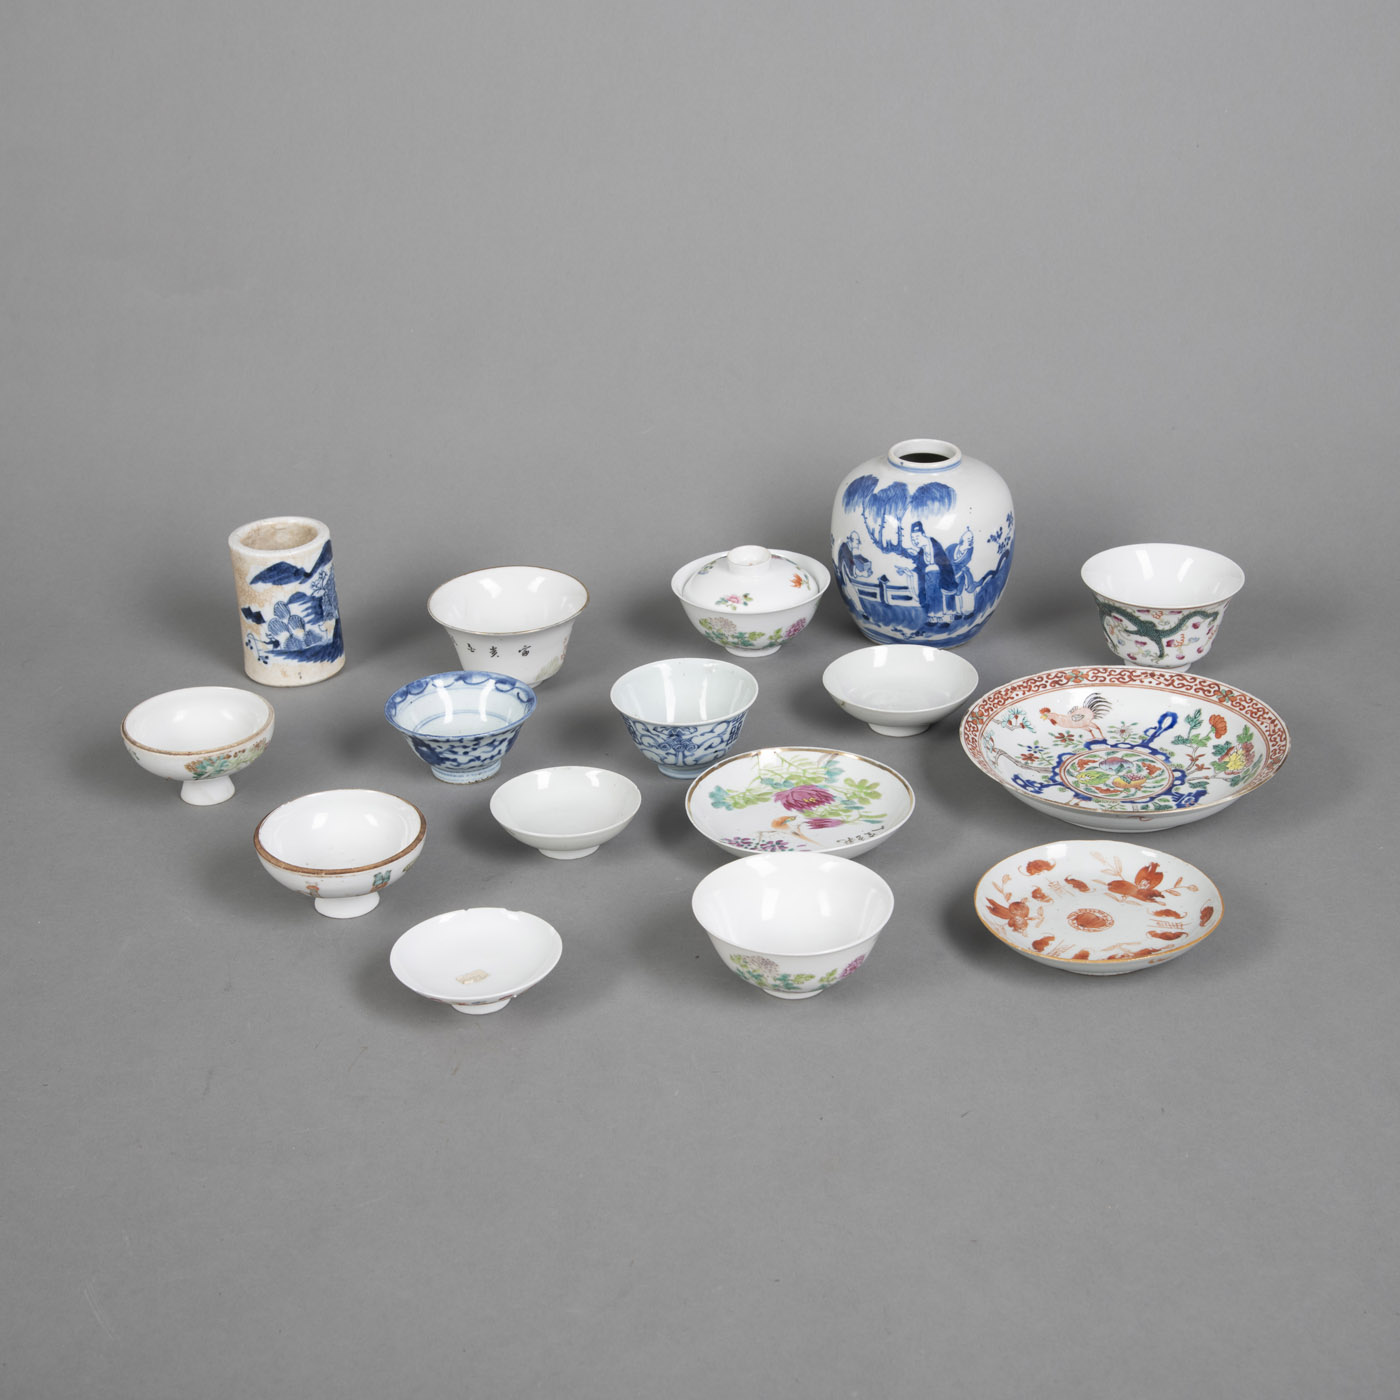 <b>A GROUP OF 'FAMILLE ROSE' RESP. BLUE-WHITE PORCELAINS: TWO COVERED DRAGON CUPS, EIGHT BOWLS OR COVERS, THREE DISHED AND TWO VASES</b>